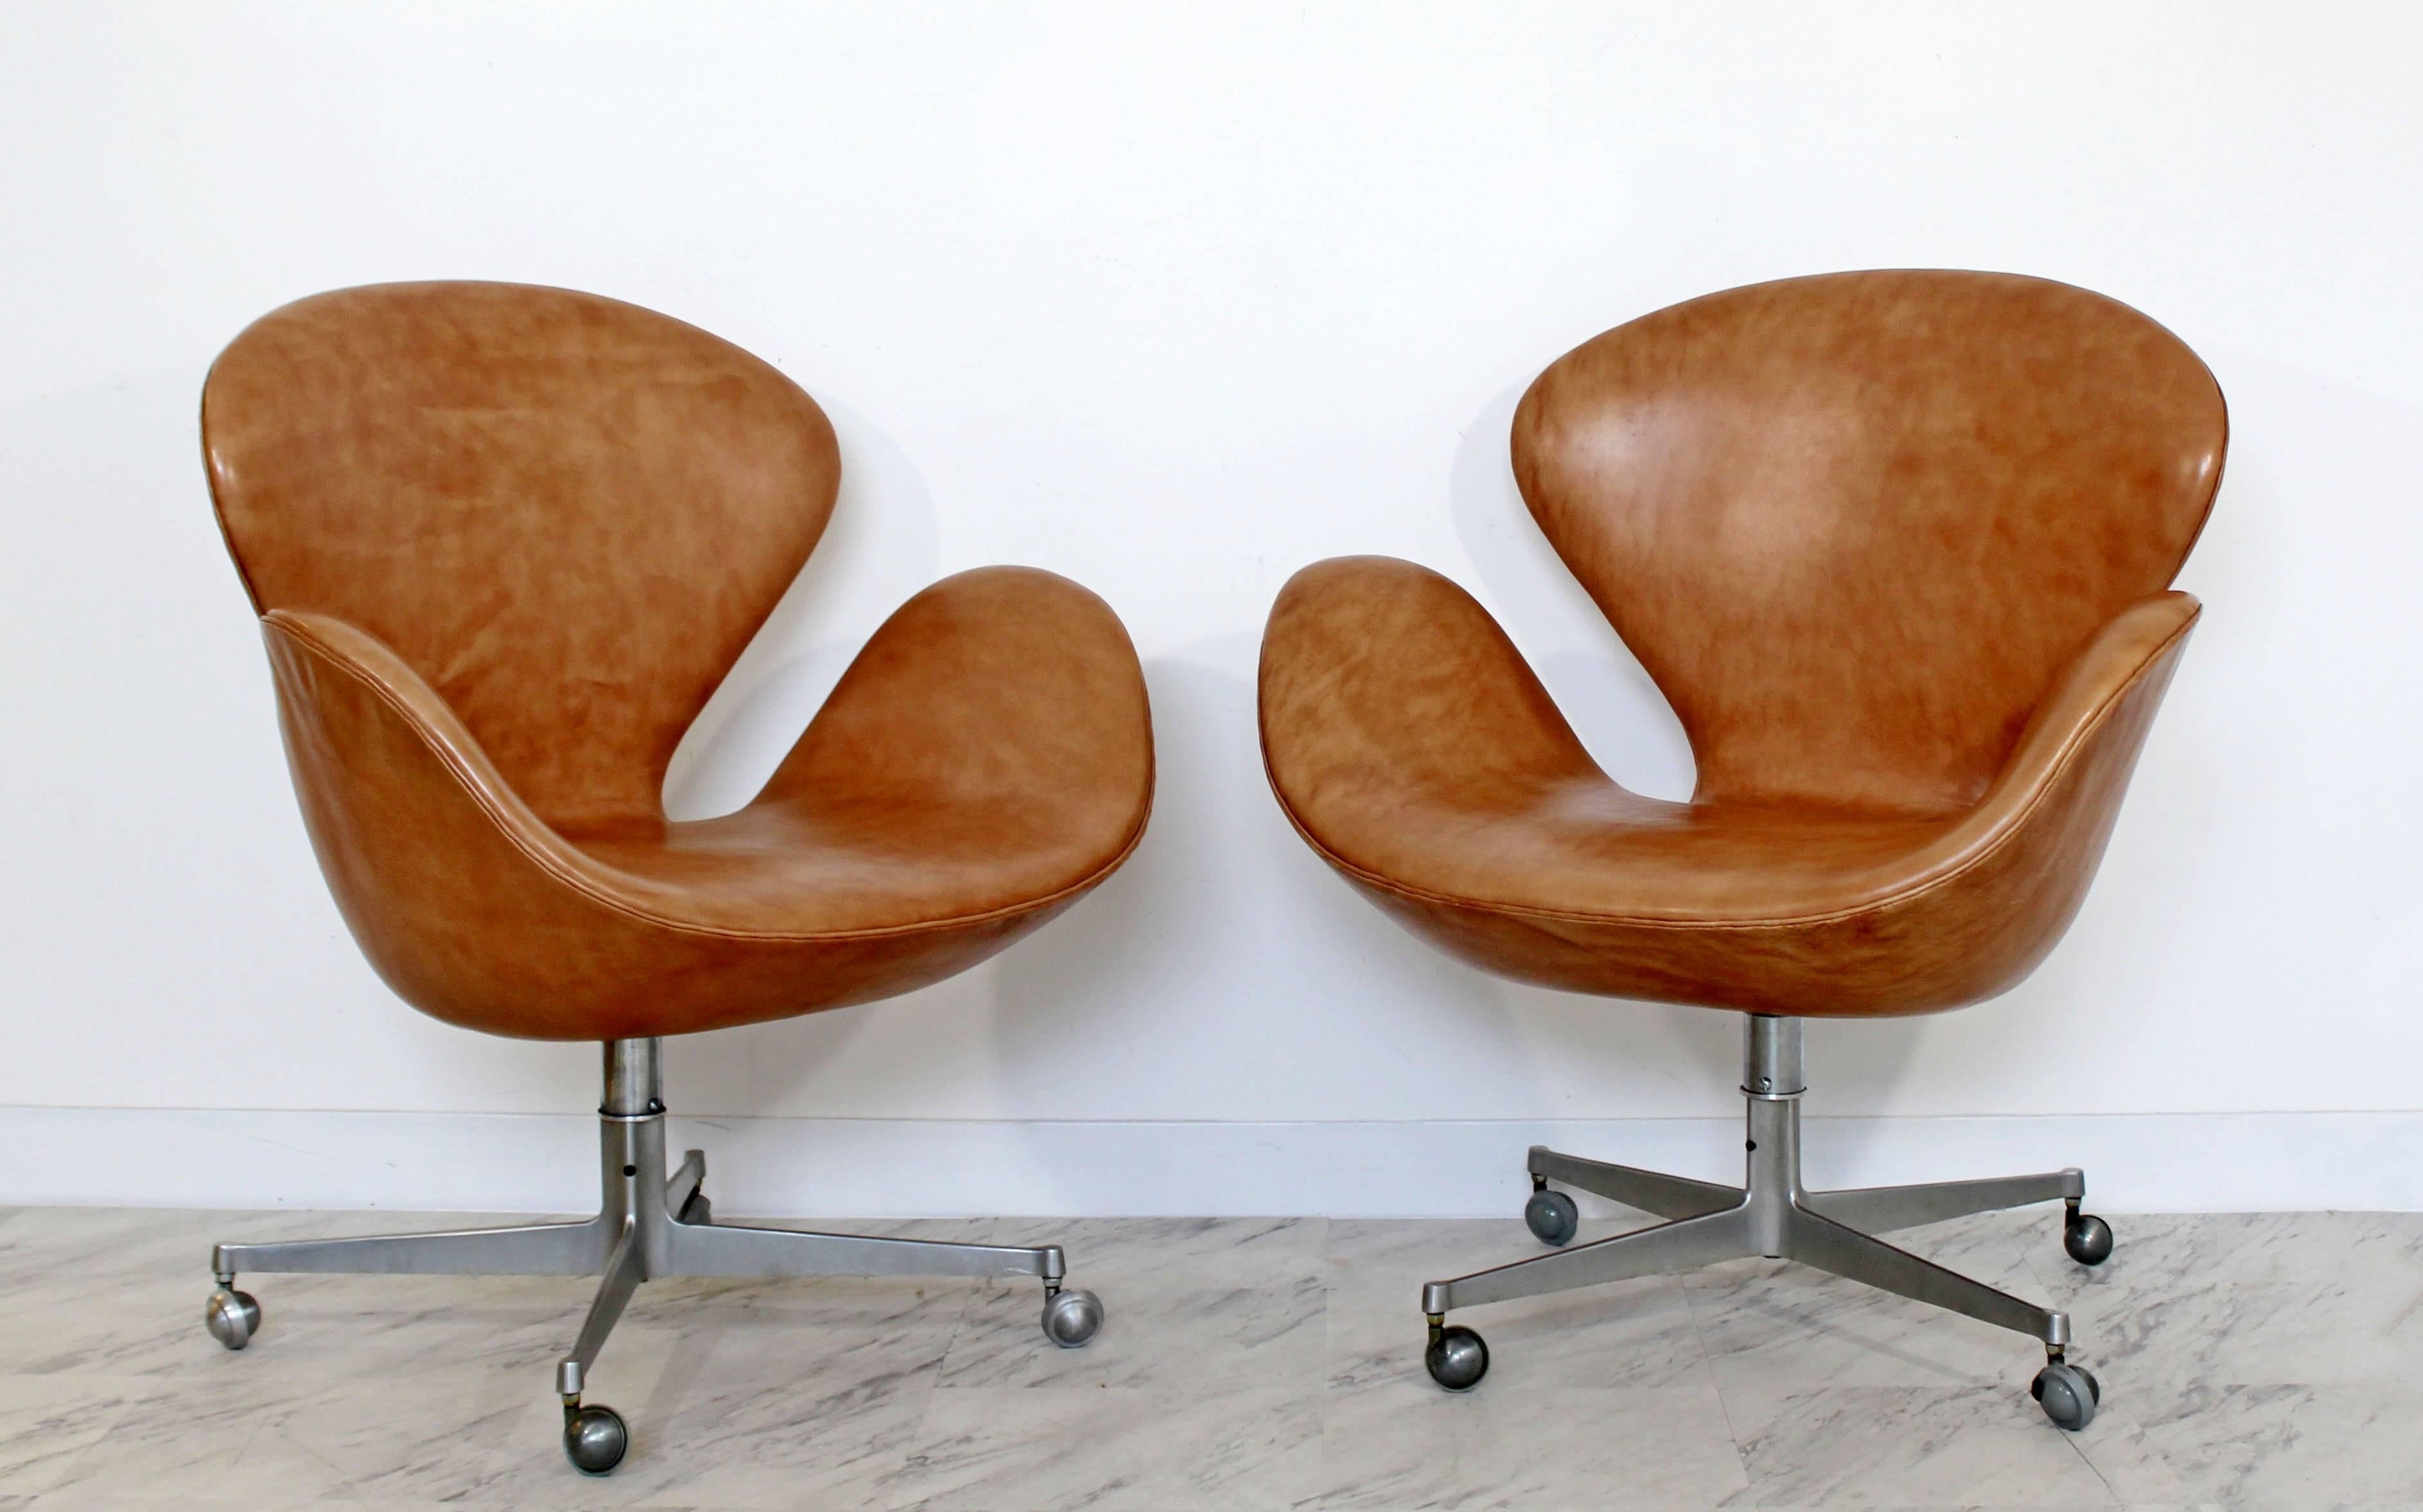 For your consideration is a magnificent pair of swivel, swan chairs on casters, by Arne Jacobsen for Fritz Hansen, circa 1960s in Denmark. In a gorgeous leather upholstery. In excellent condition. The dimensions are 30